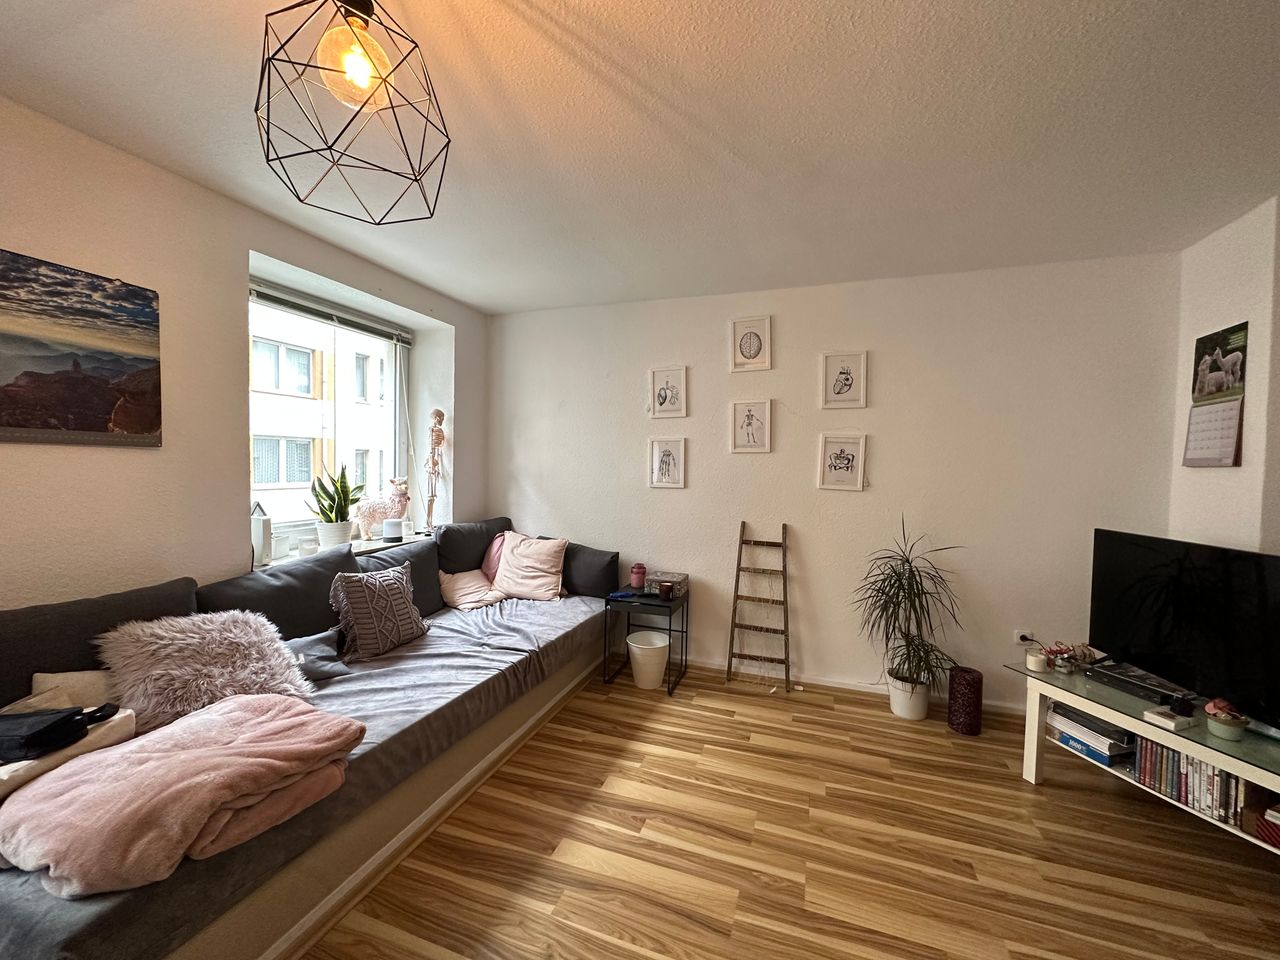 s-h-i.de: "Südstadt, EBK possible, 2-room and balcony nearby, suitable for shared flat" - caretaker service incl.